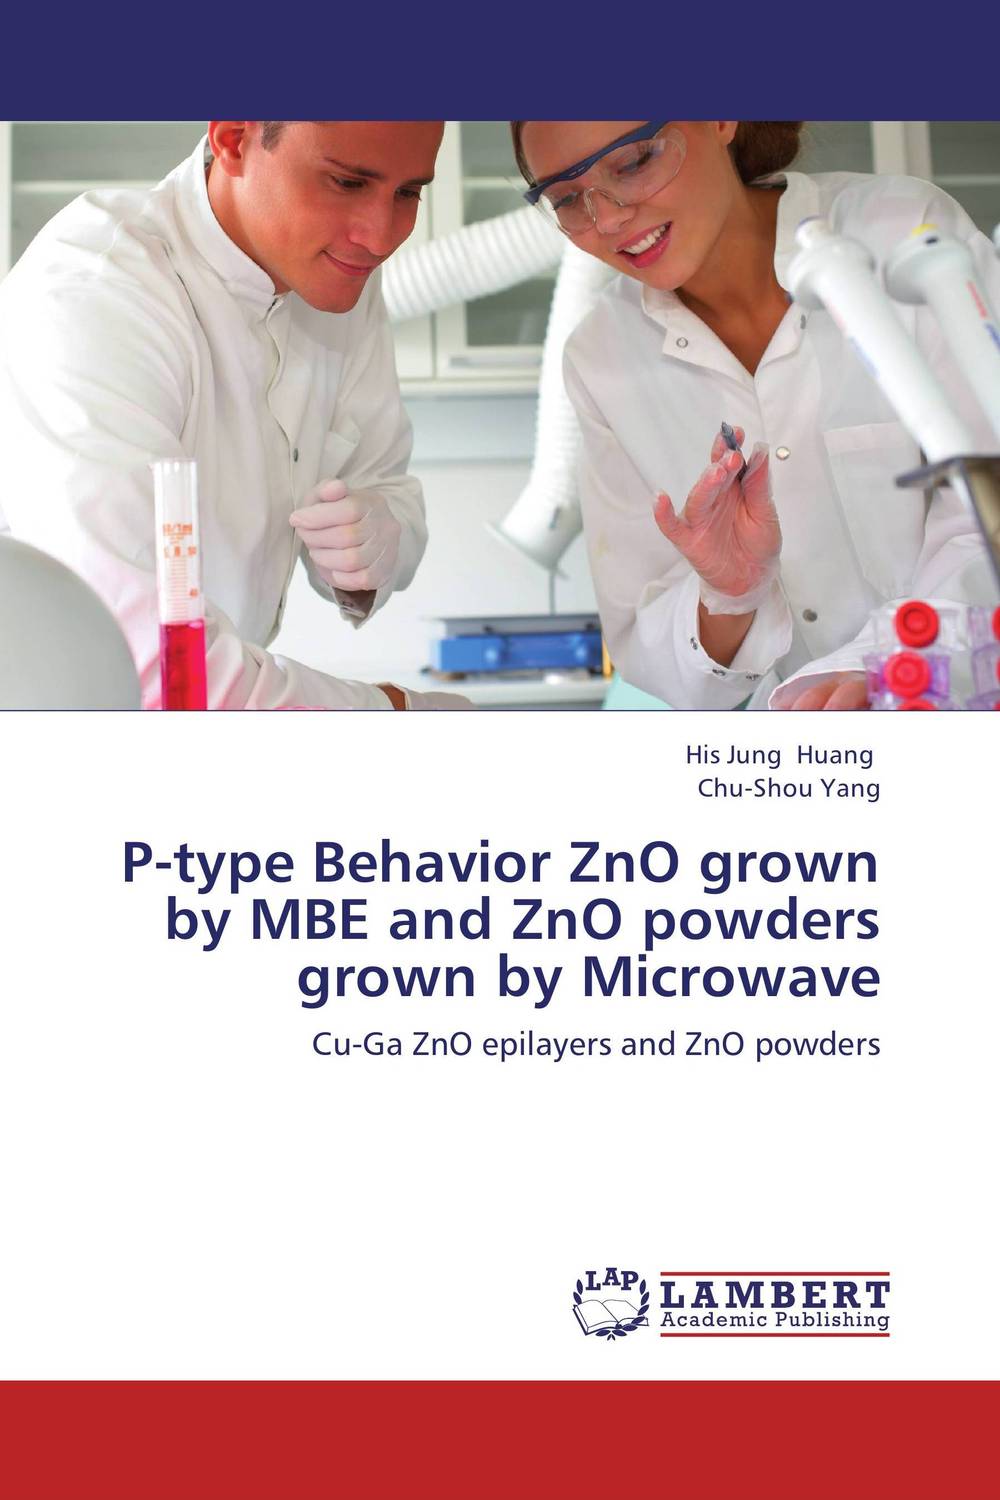 P-type Behavior ZnO grown by MBE and ZnO powders grown by Microwave